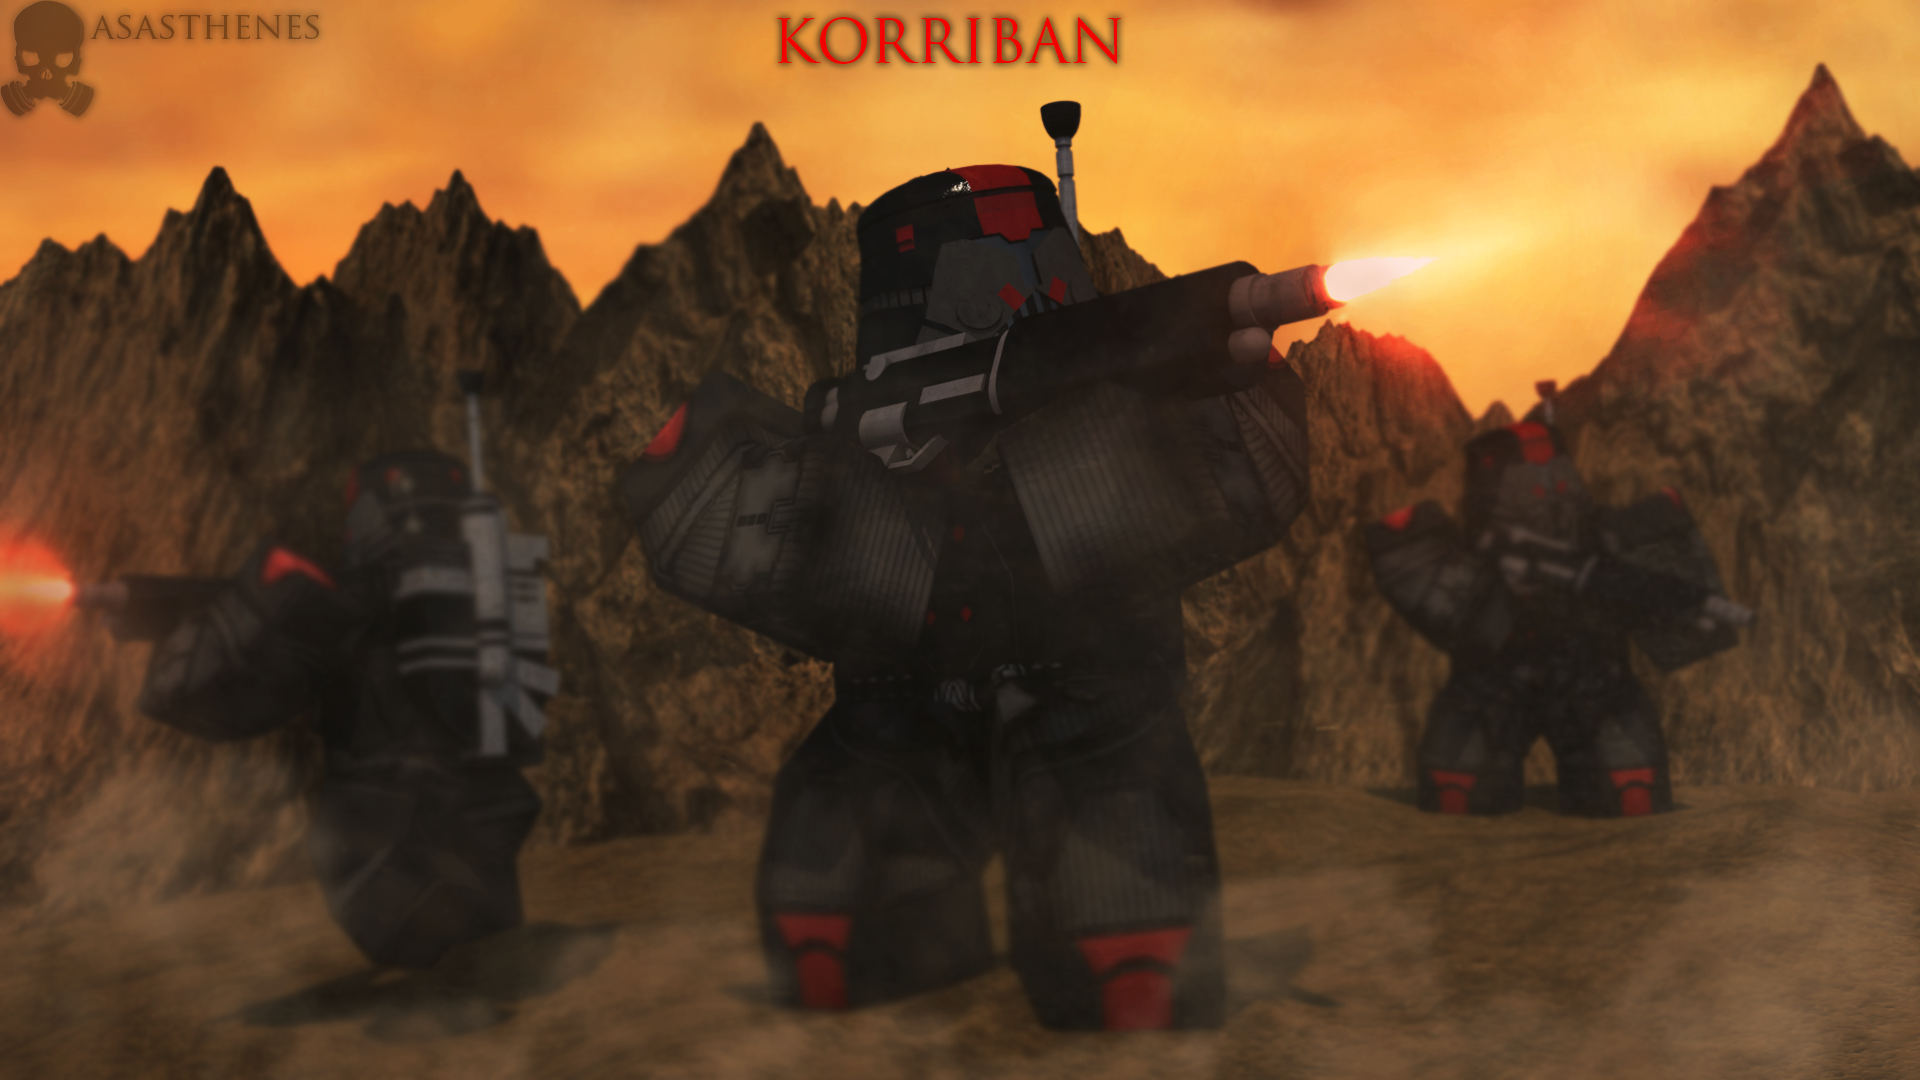 Korriban Sith By Asasthenes On Deviantart - the first order sith empire korriban roblox